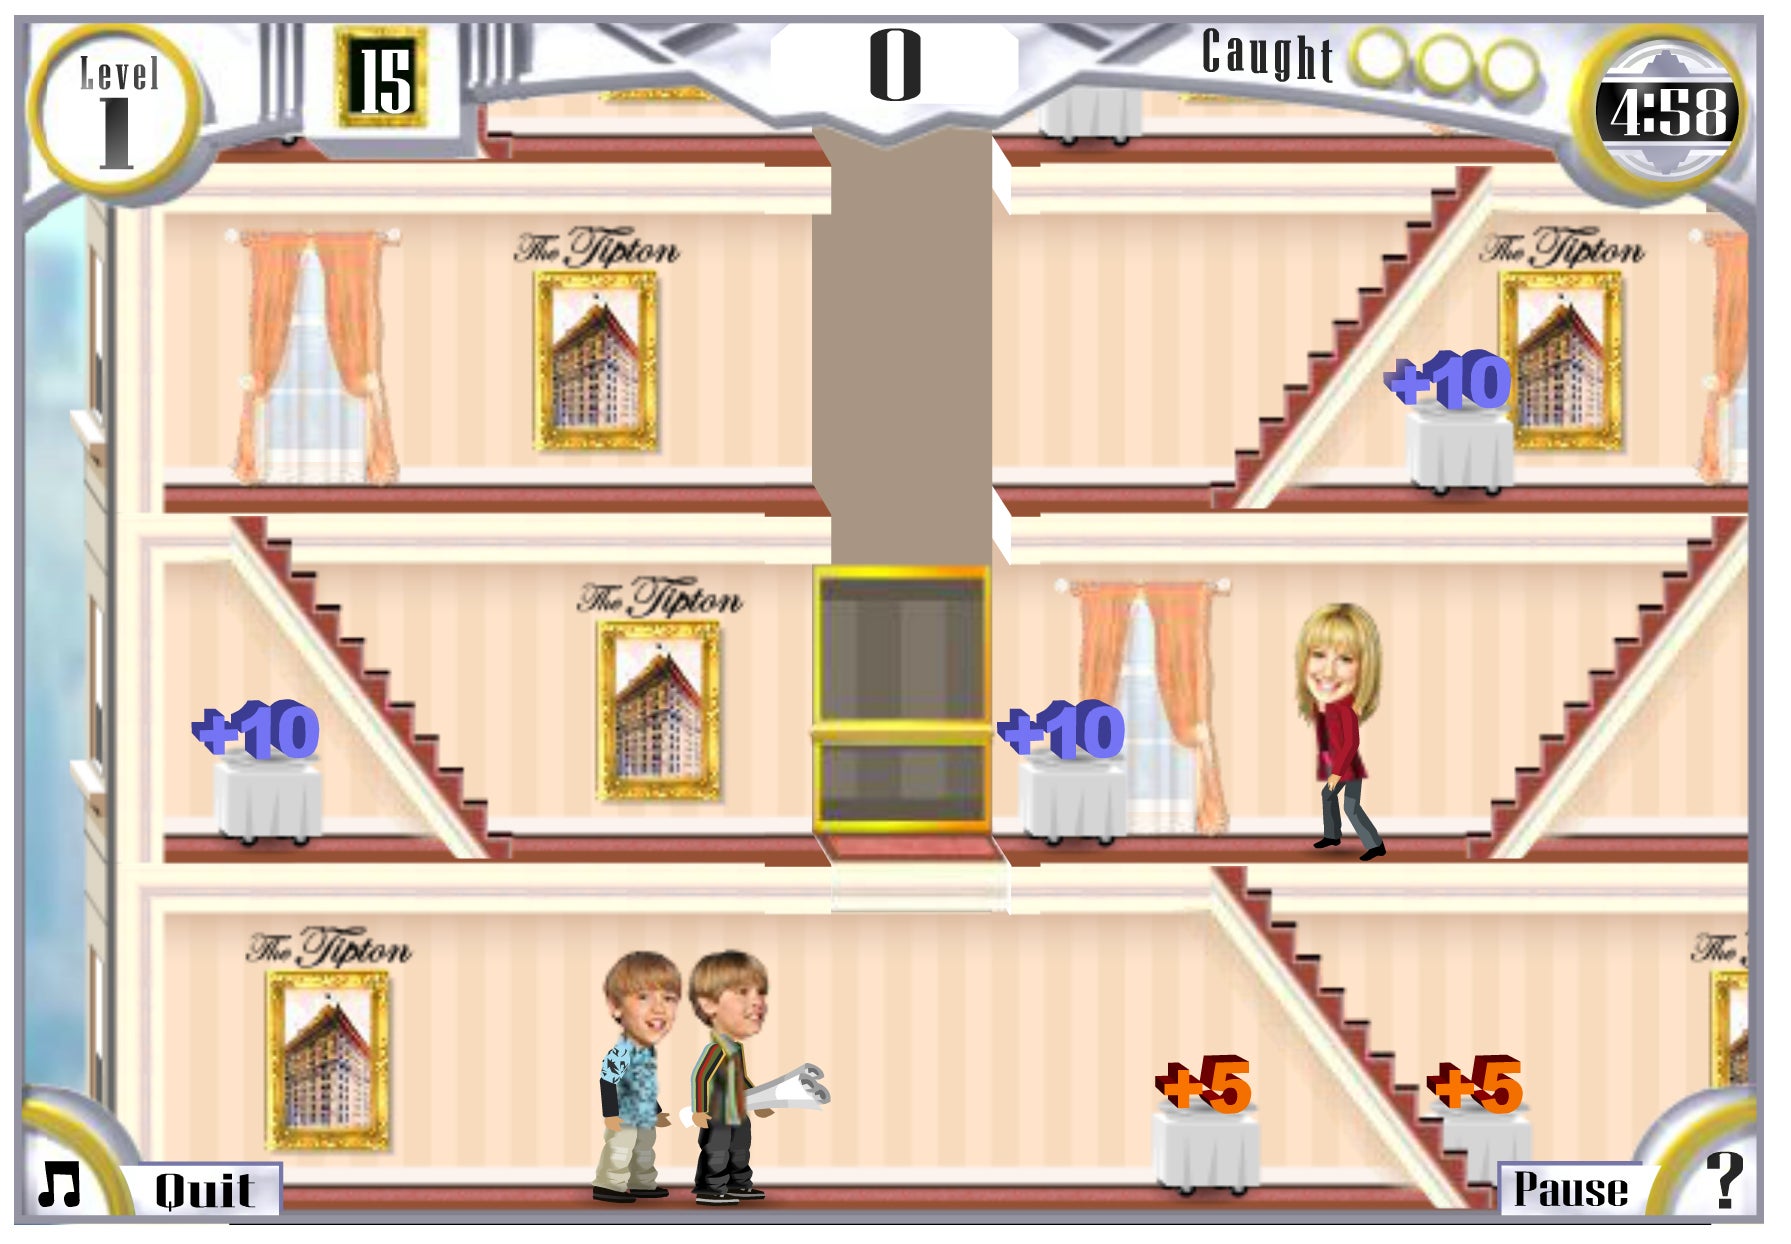 12 Nostalgic Arcade Games From Your Childhood You Can Still Play Online